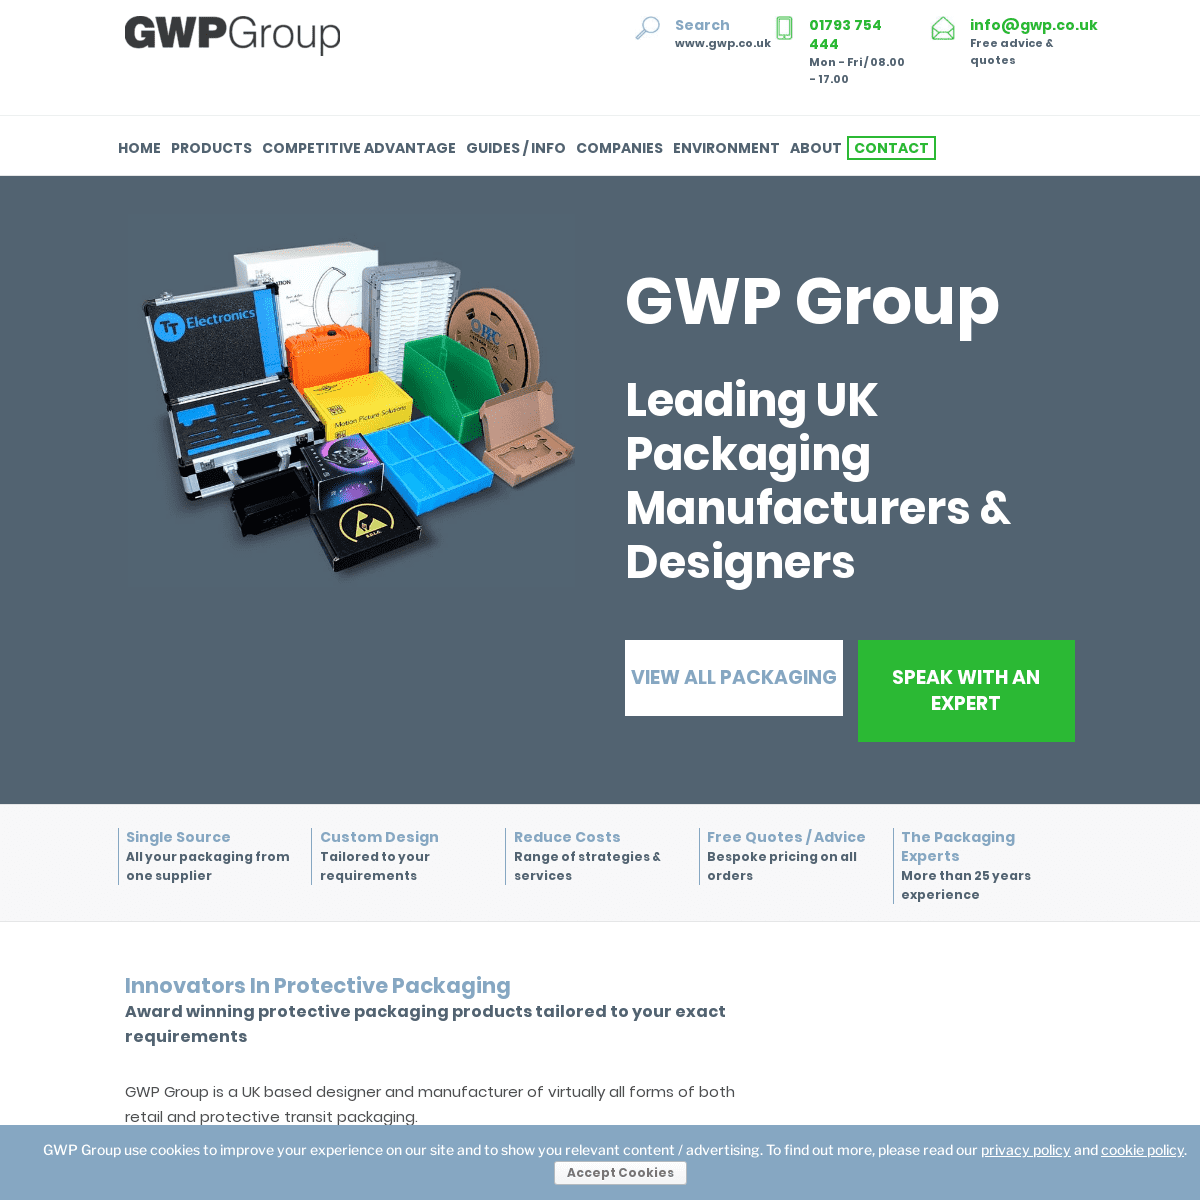 A complete backup of gwp.co.uk